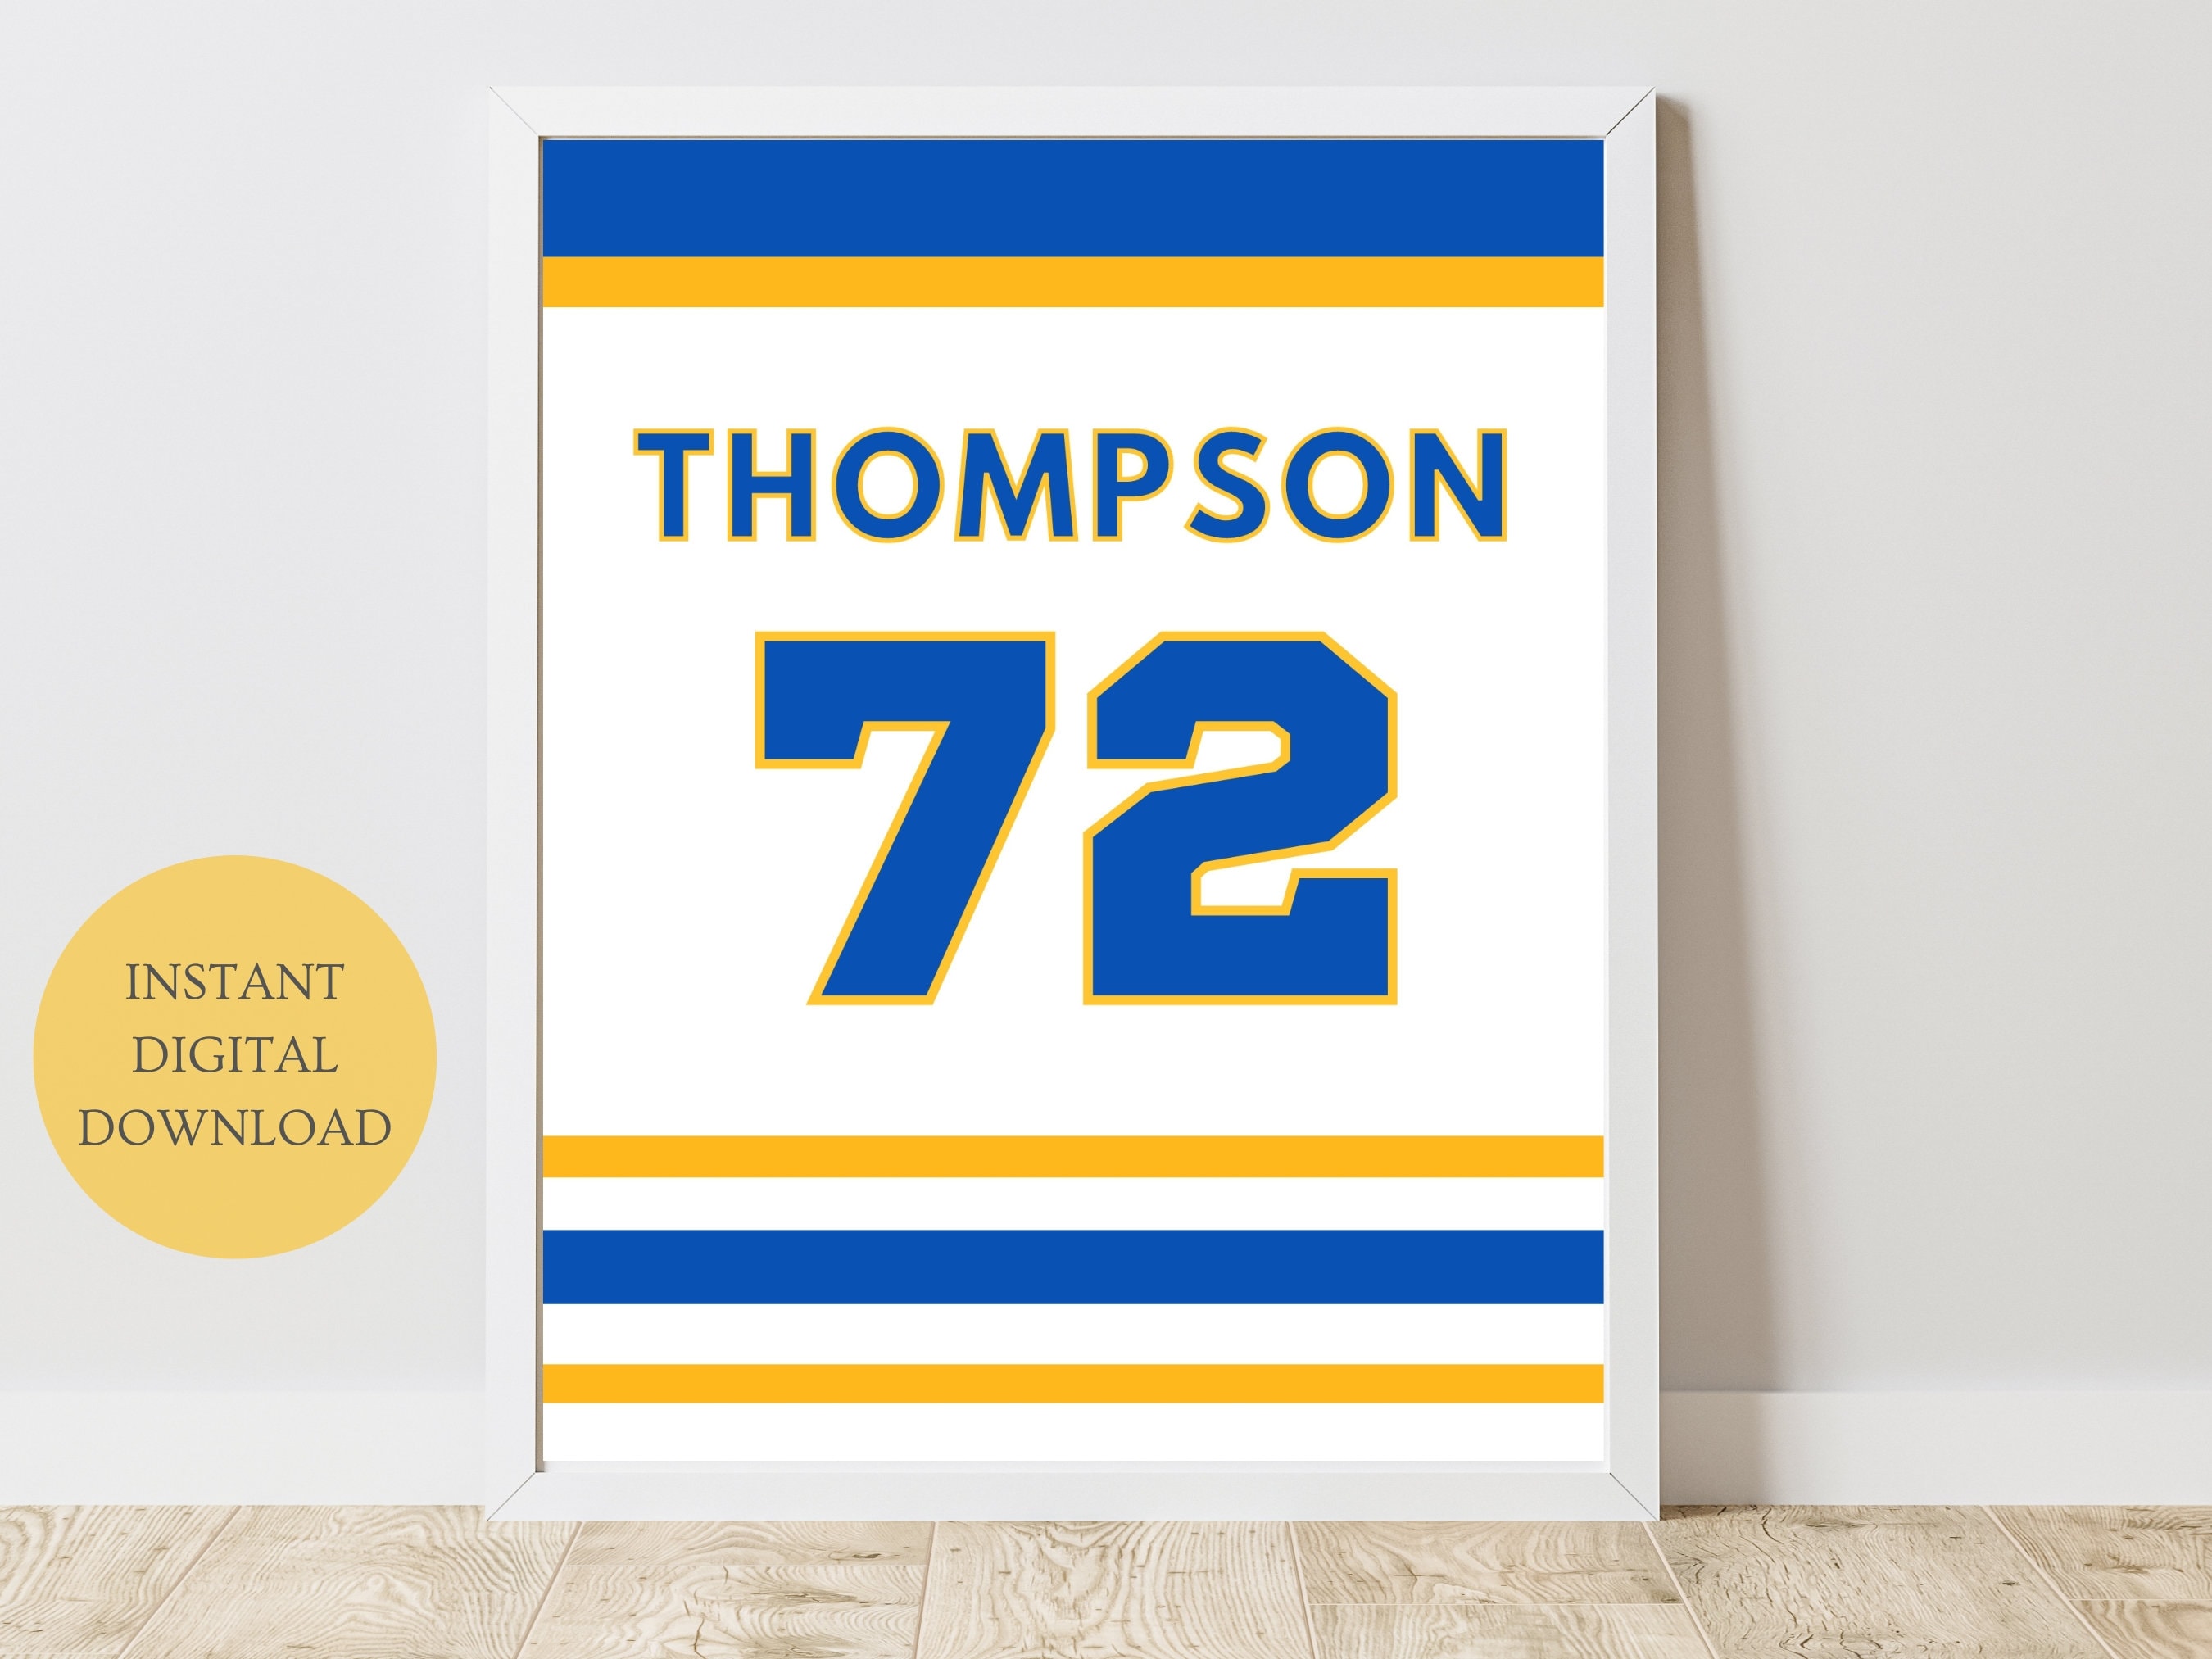 Personalized Name And Number NHL Buffalo Sabres Special Peanuts 3D Hoodie  Zip Hoodie Christmas Gift